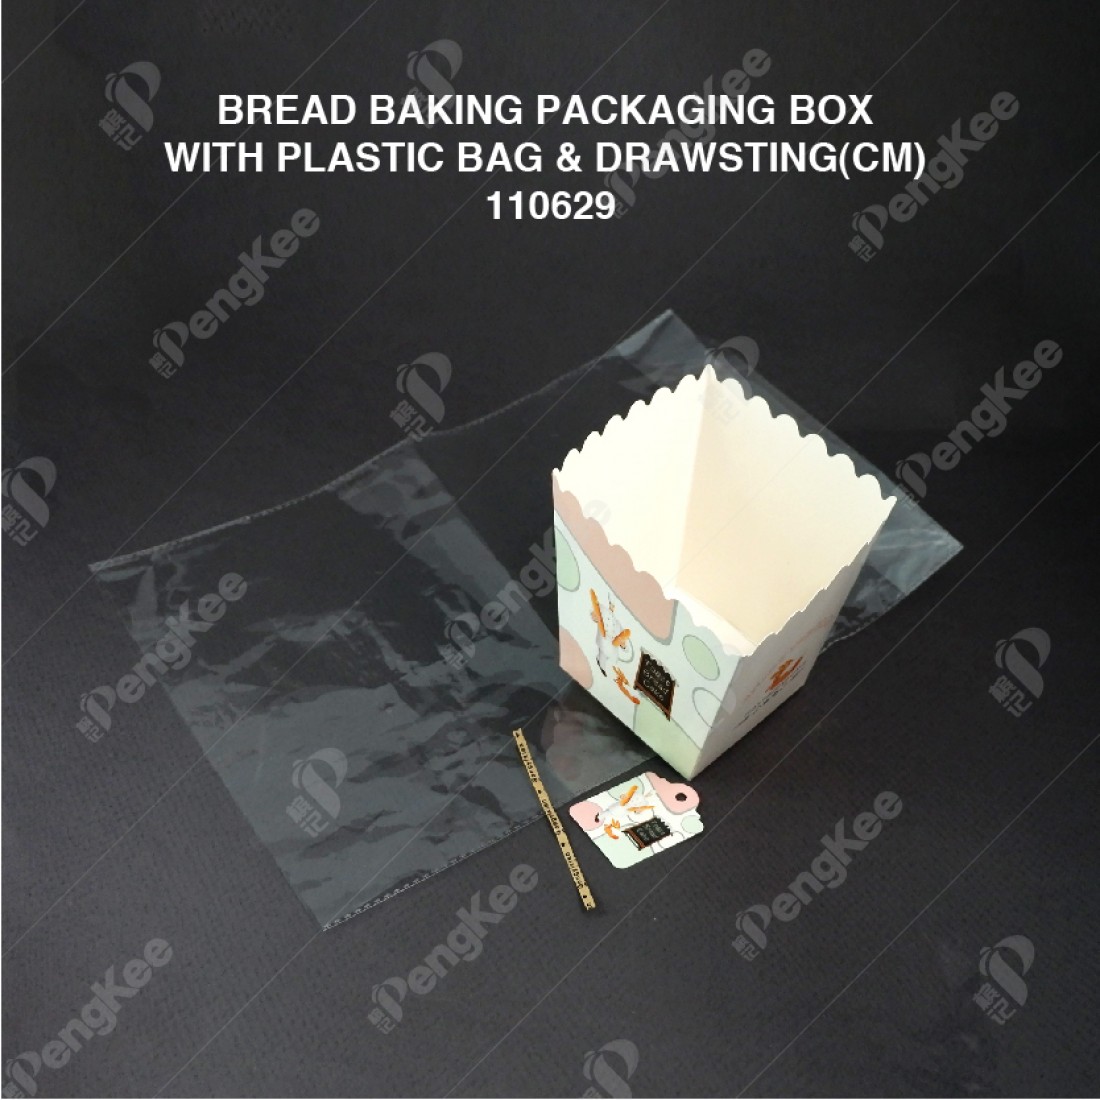 BREAD BAKING PACKAGING BOX WITH PLASTIC BAG & DRAWSTING(CM) 100'S